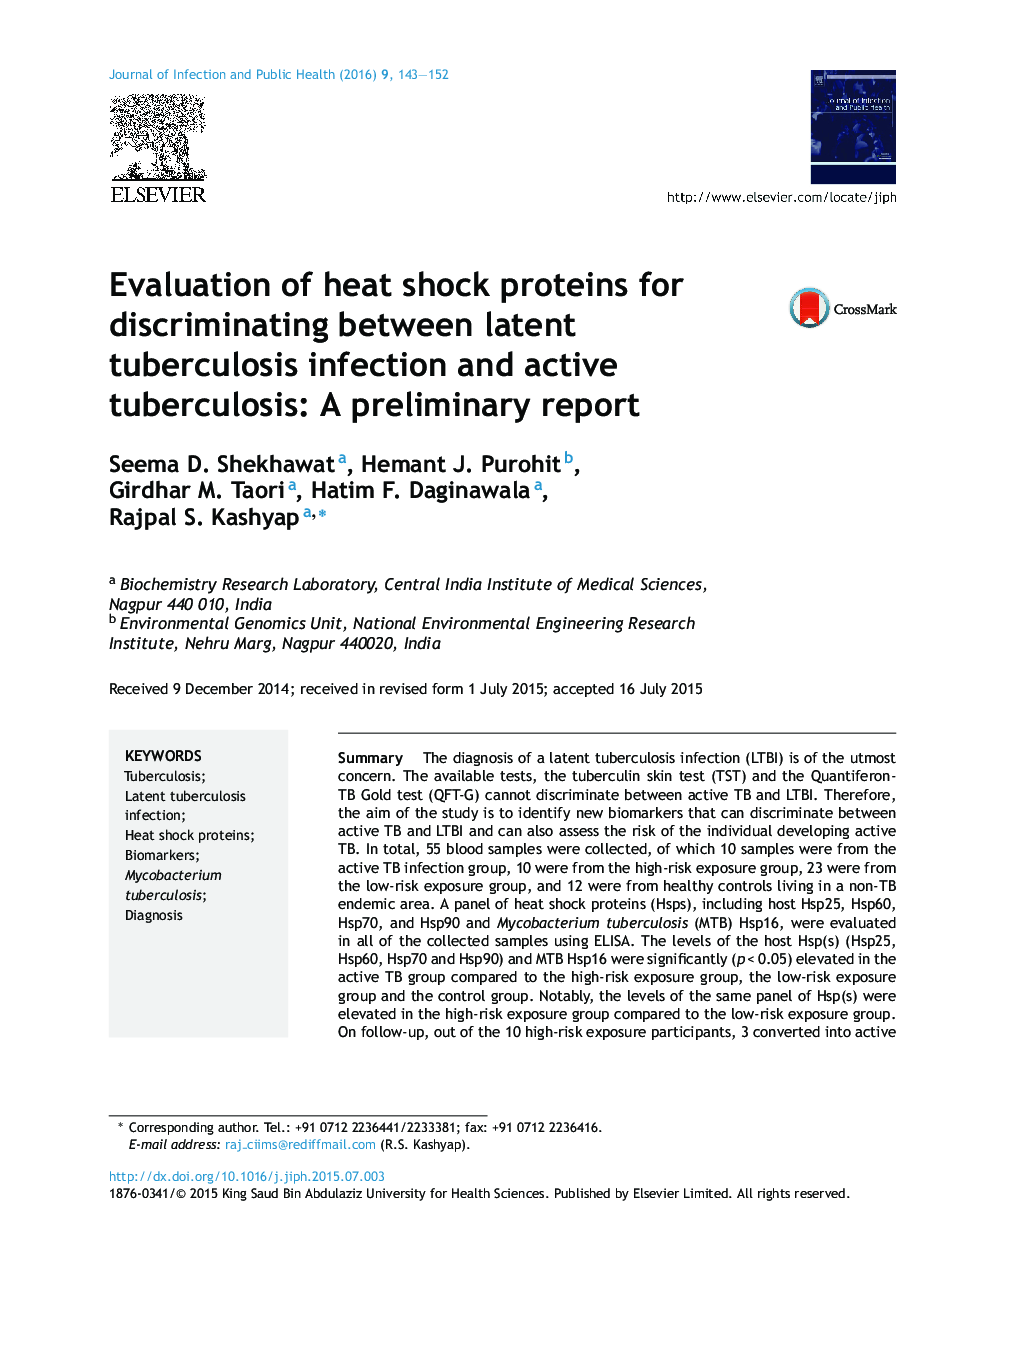 Evaluation of heat shock proteins for discriminating between latent tuberculosis infection and active tuberculosis: A preliminary report